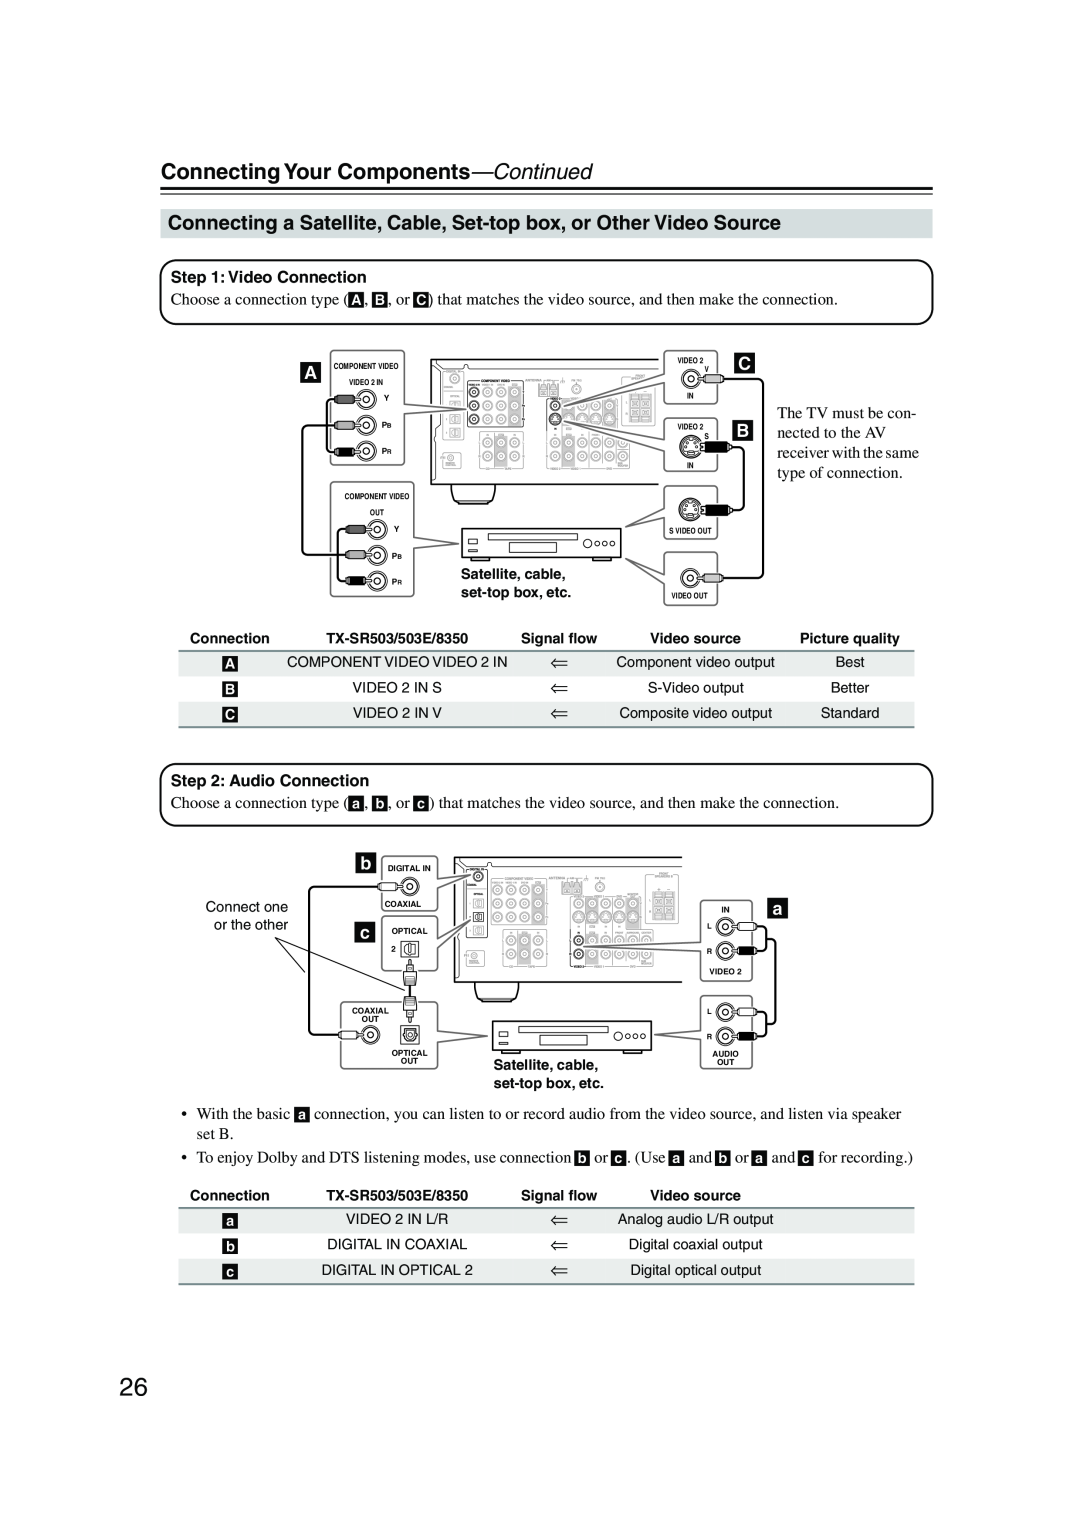 Onkyo TX-SR503E, TX-SR8350 instruction manual Connecting Your Components—Continued, Choose a connection type a 